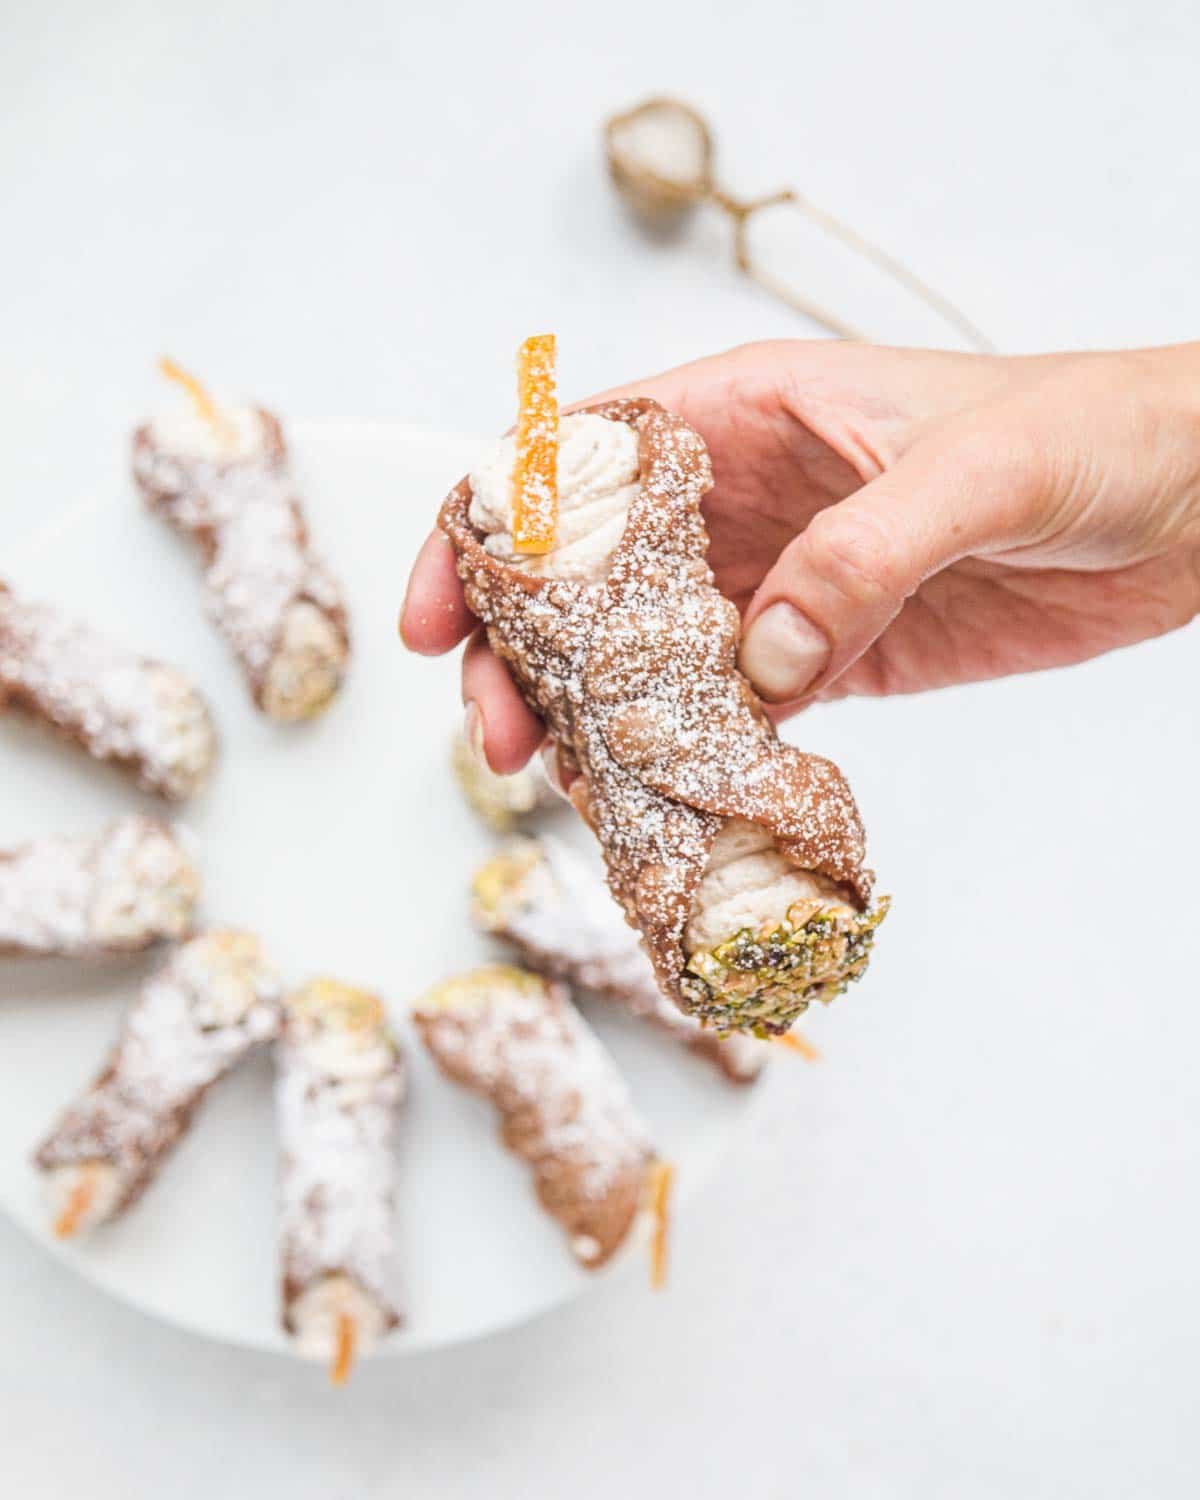 Female hand holding a freshly made cannolo siciliano